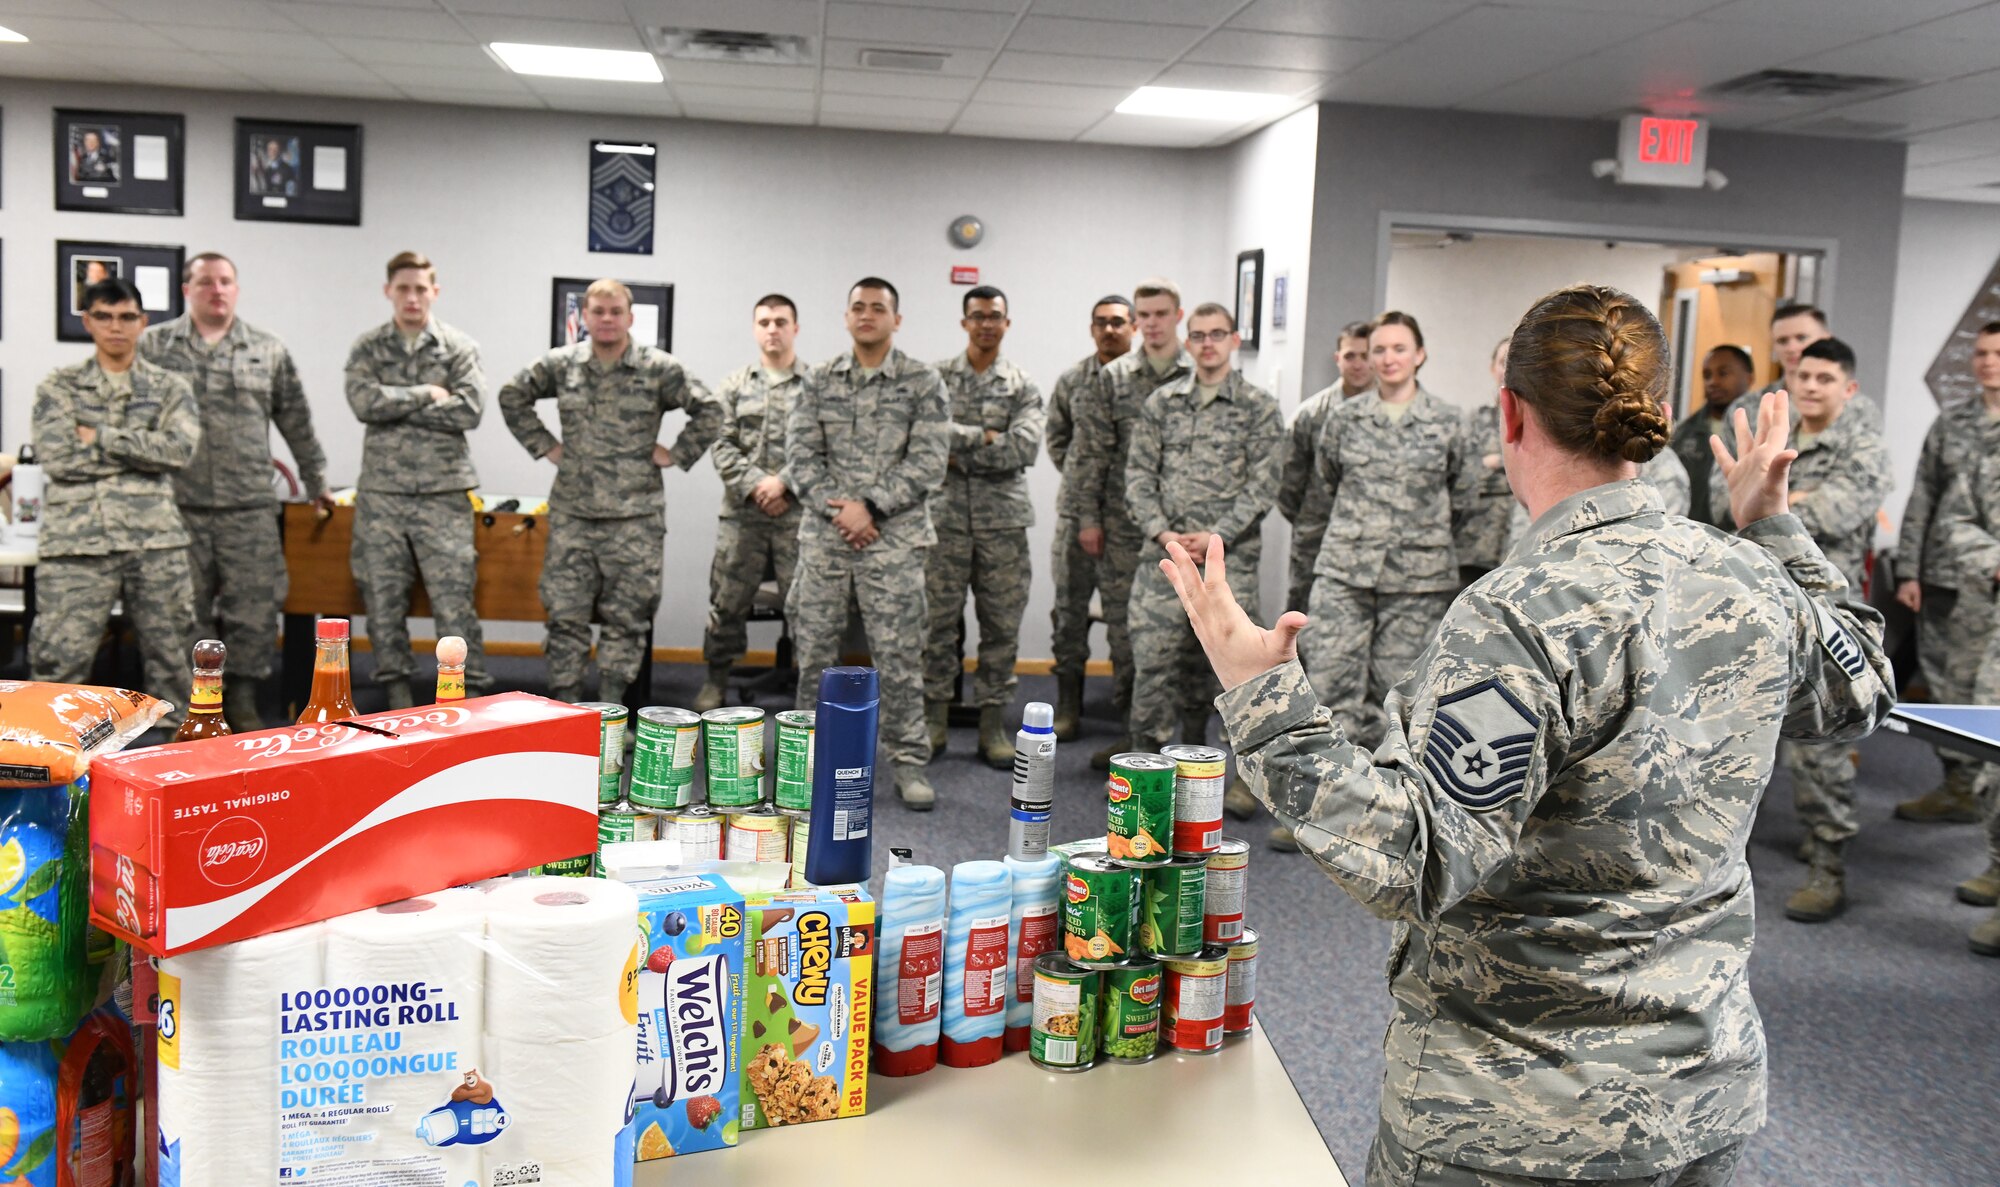 Airmen from Ellsworth Air Force Base, S.D., build care packages to help aid the hurricane relief and reconstruction effort at Tyndall AFB, Fla., Nov. 1, 2018. The care packages were filled with essential items such as toiletries, shoe insoles and non-perishable snacks. (U.S. Air Force photo by Airman 1st Class Thomas I. Karol)